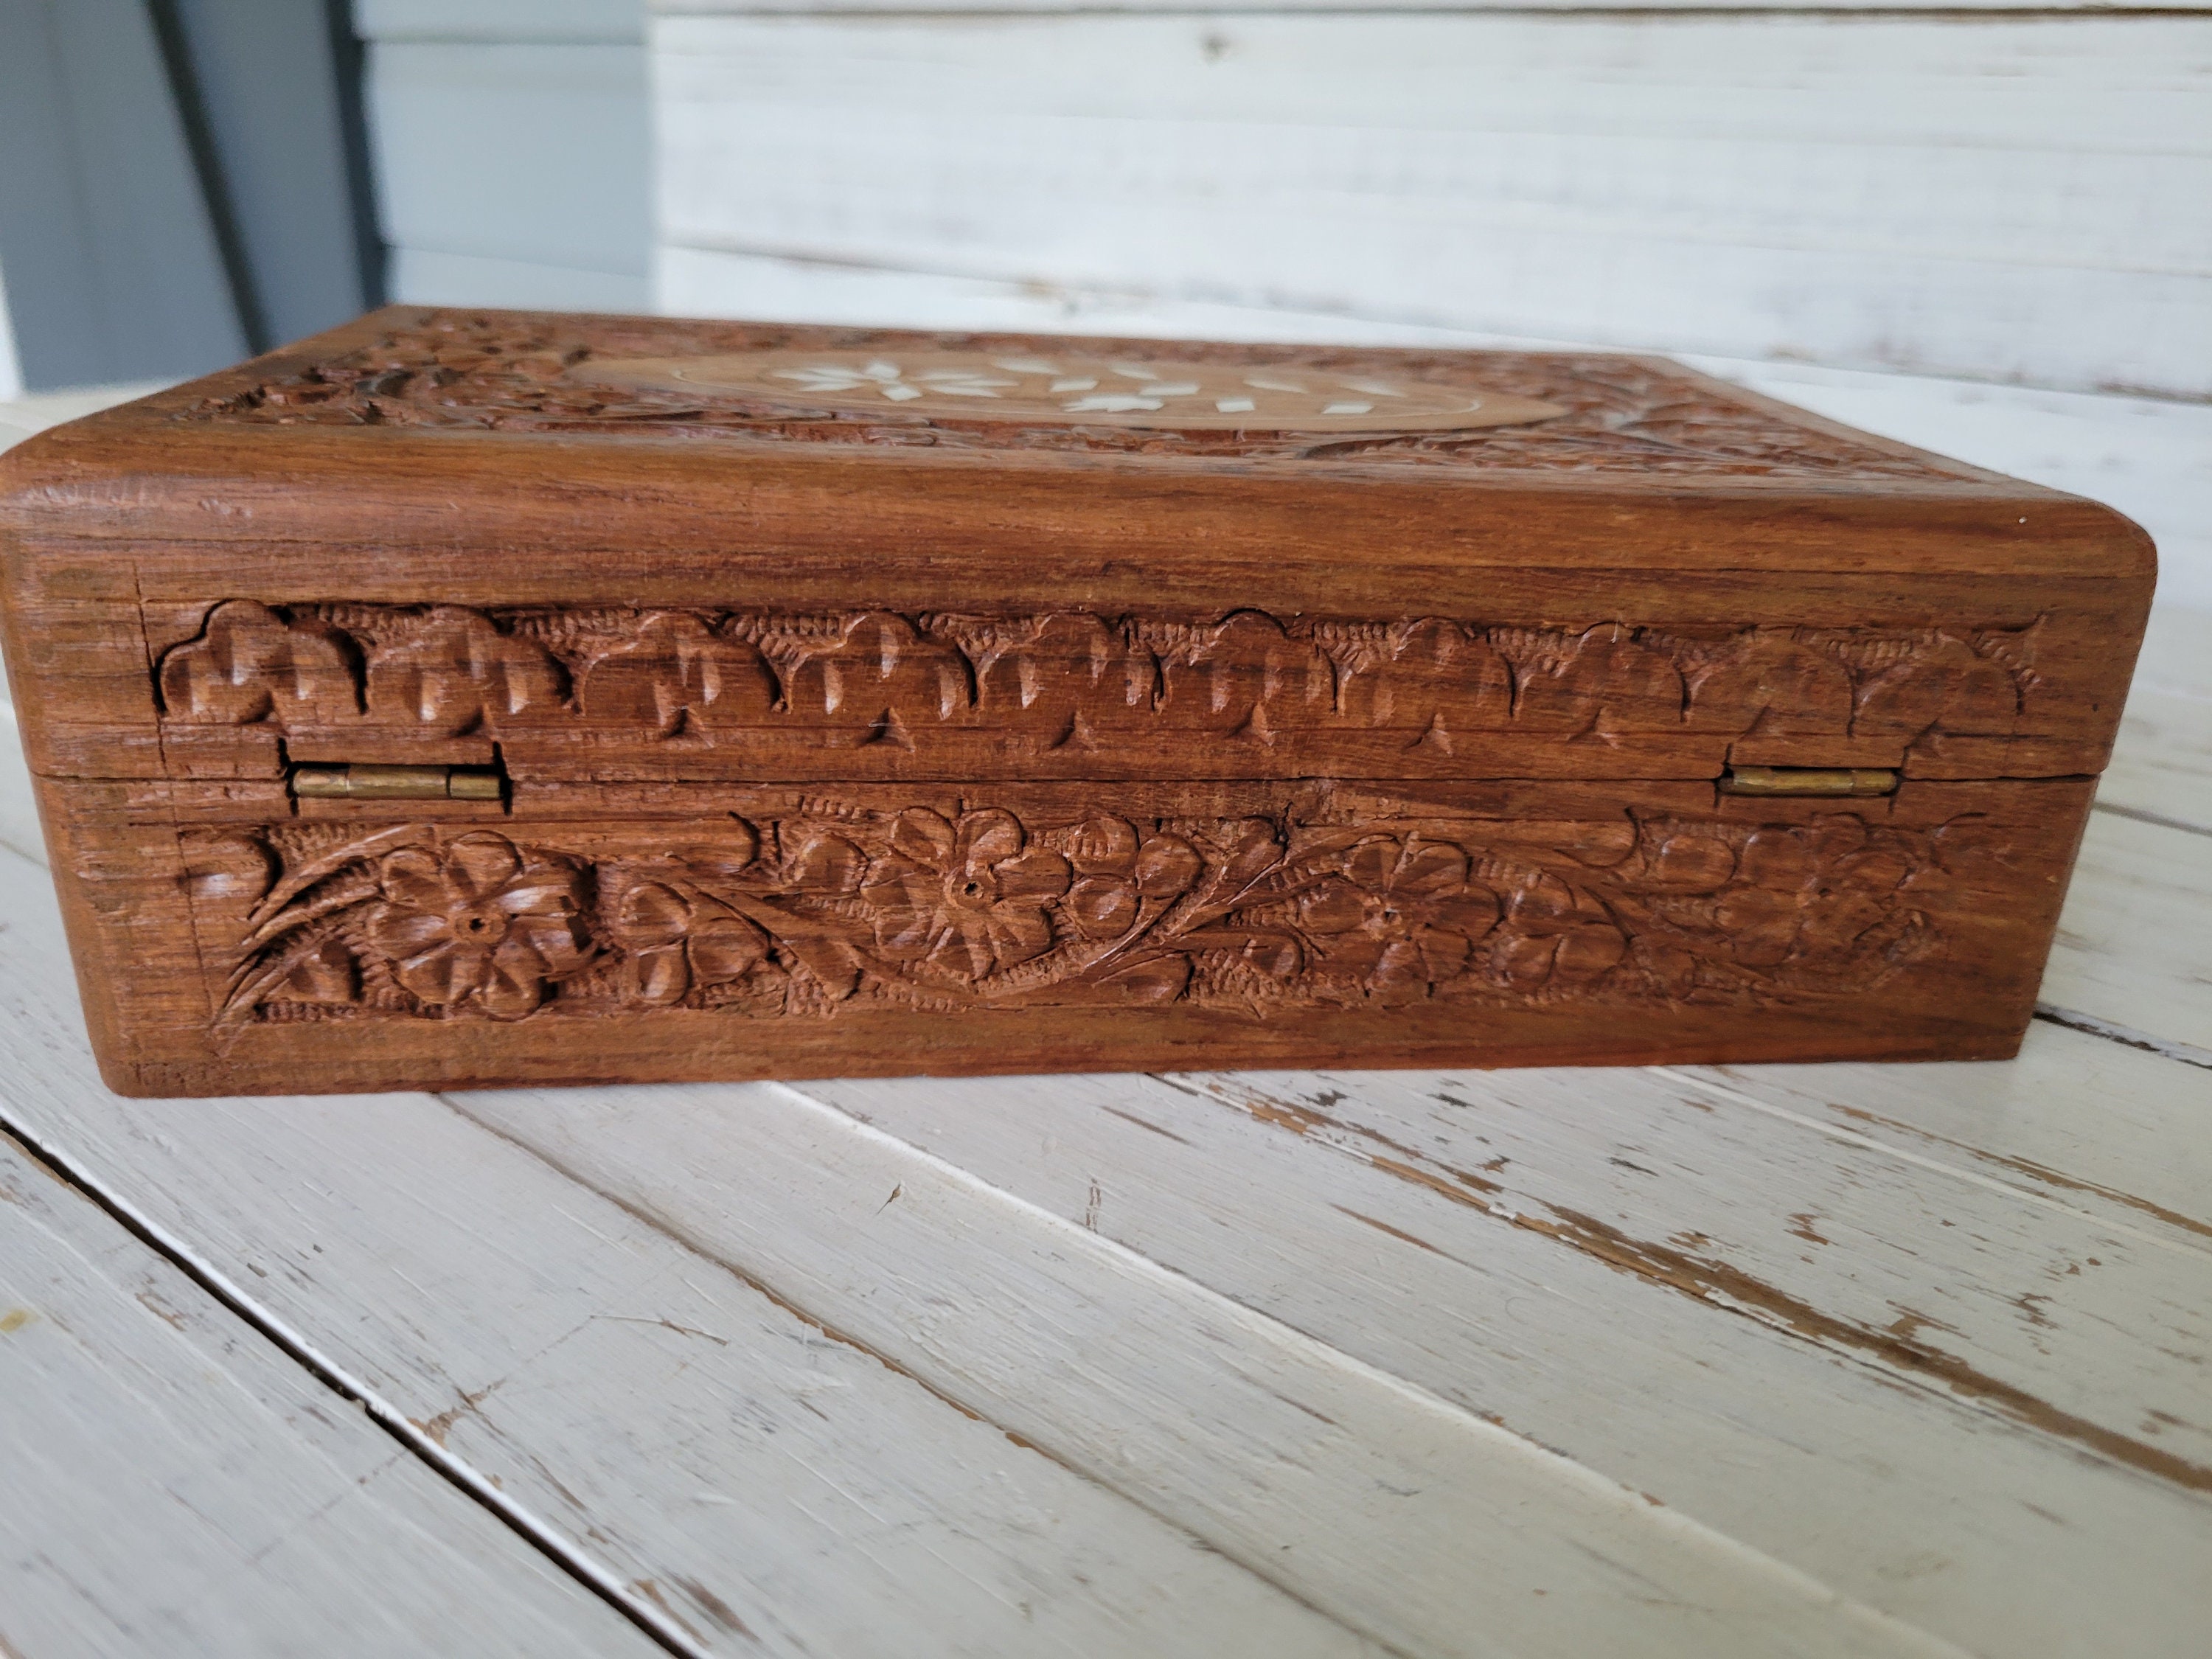 Wooden Decorative Box Intricately Carved Wooden Storage Etsy